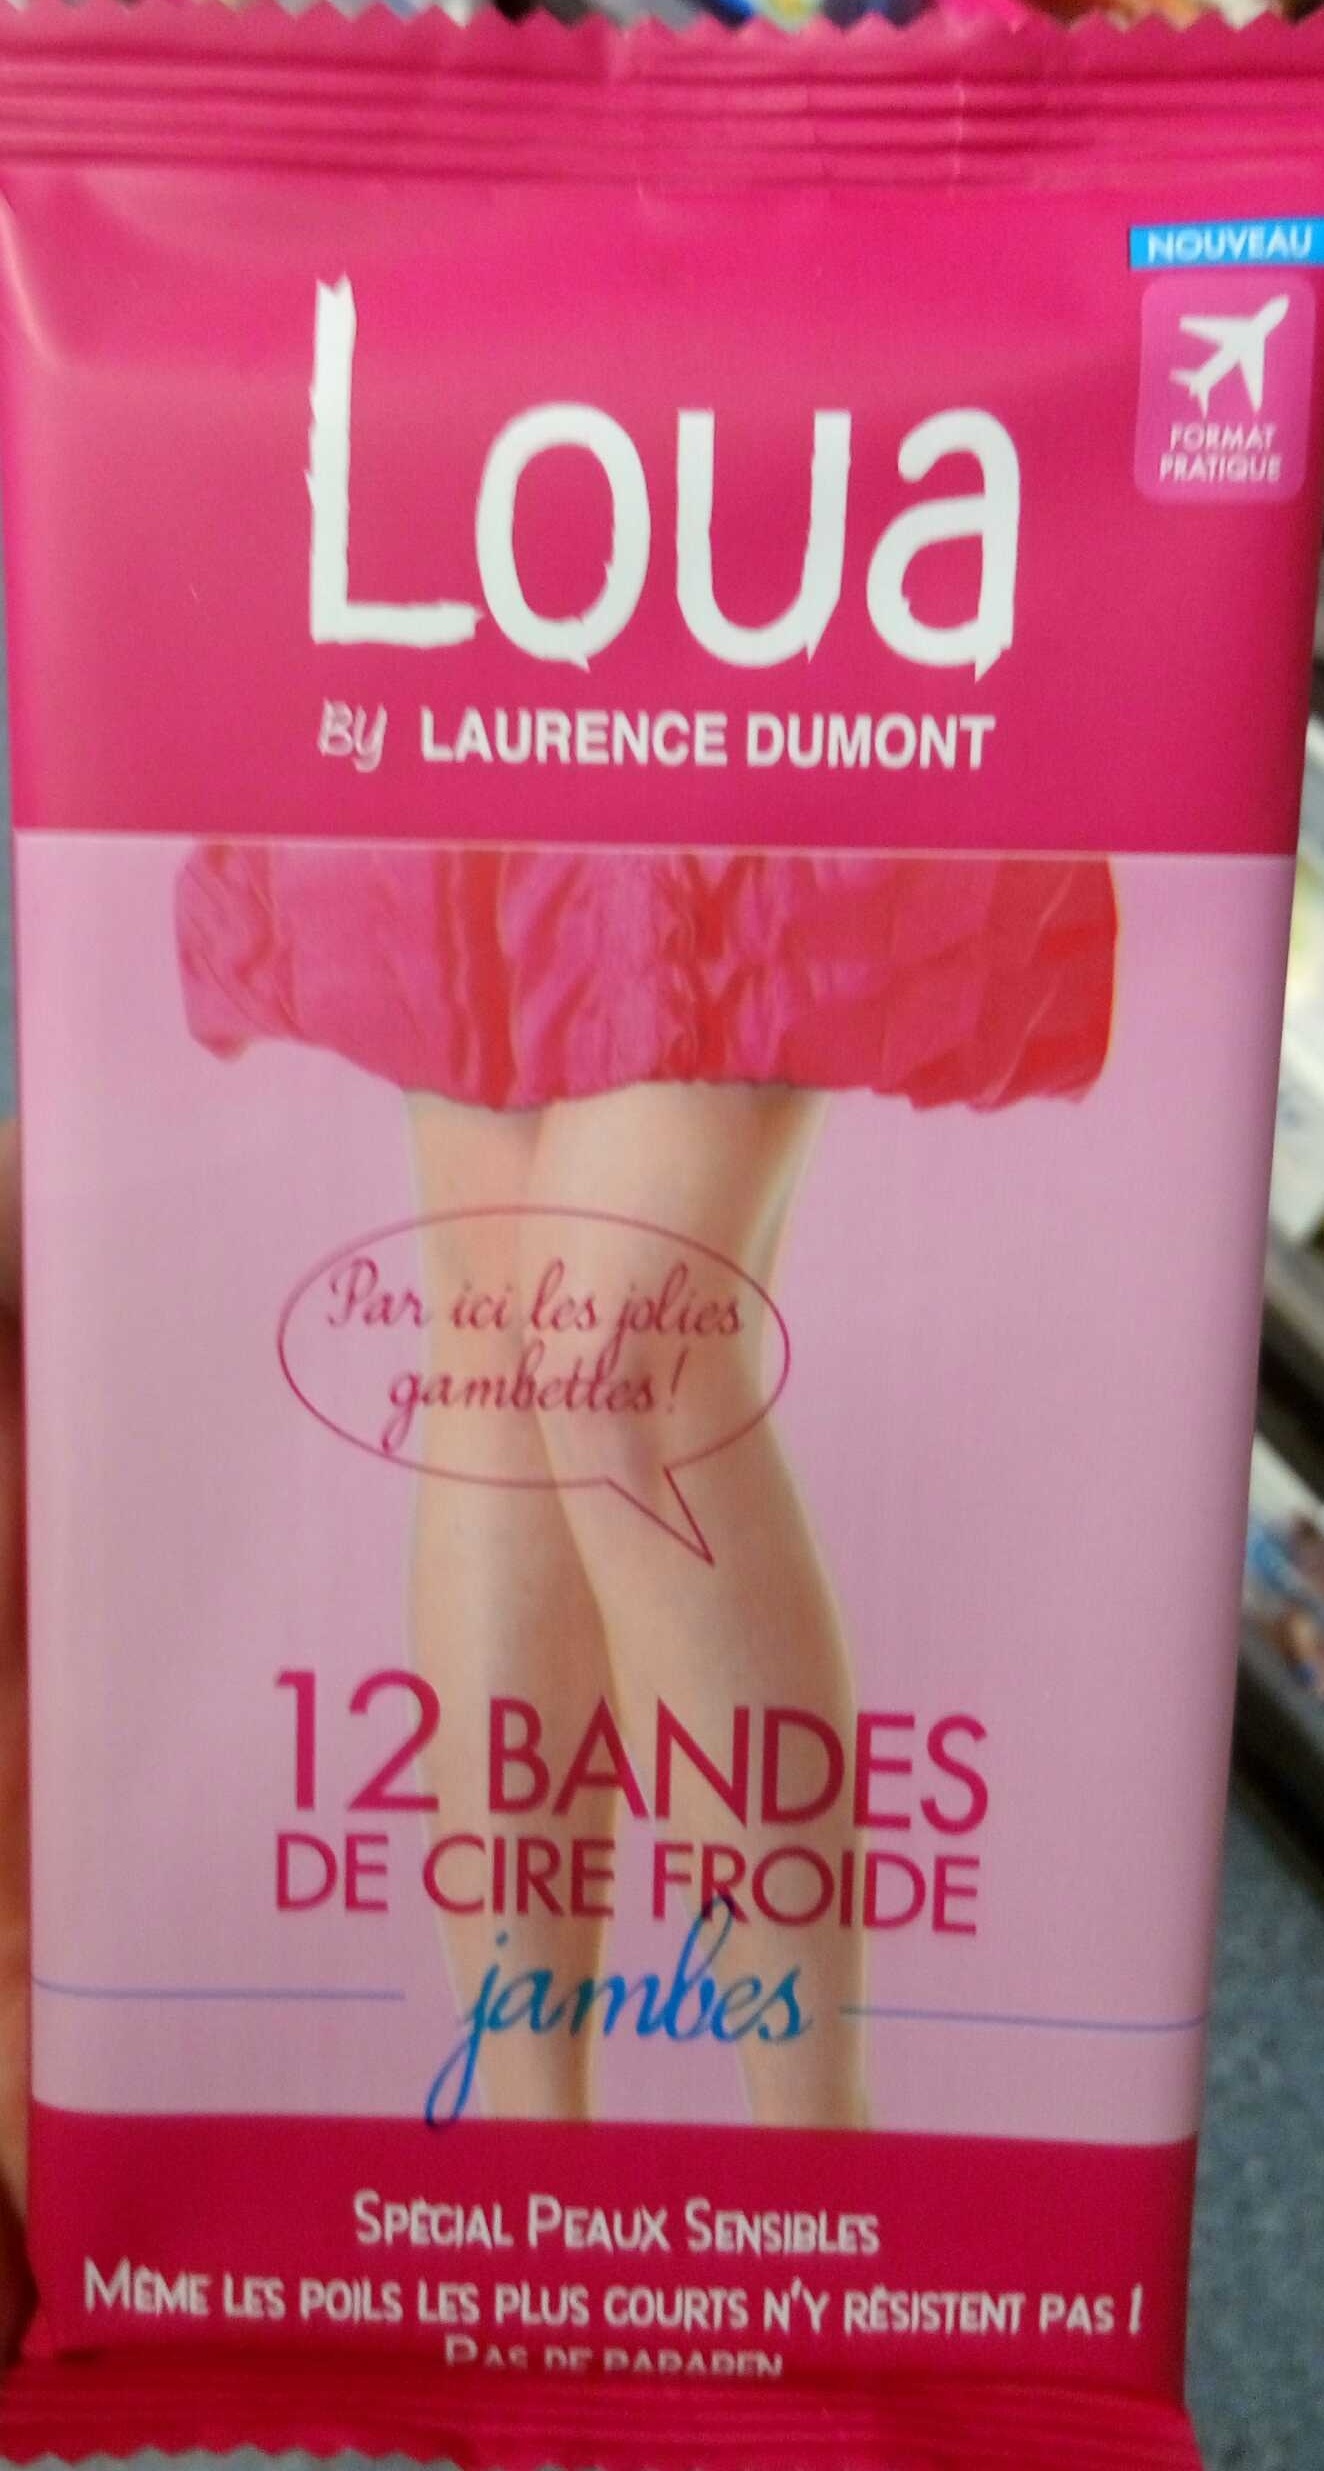 Bandes de cire froide jambes - Product - fr